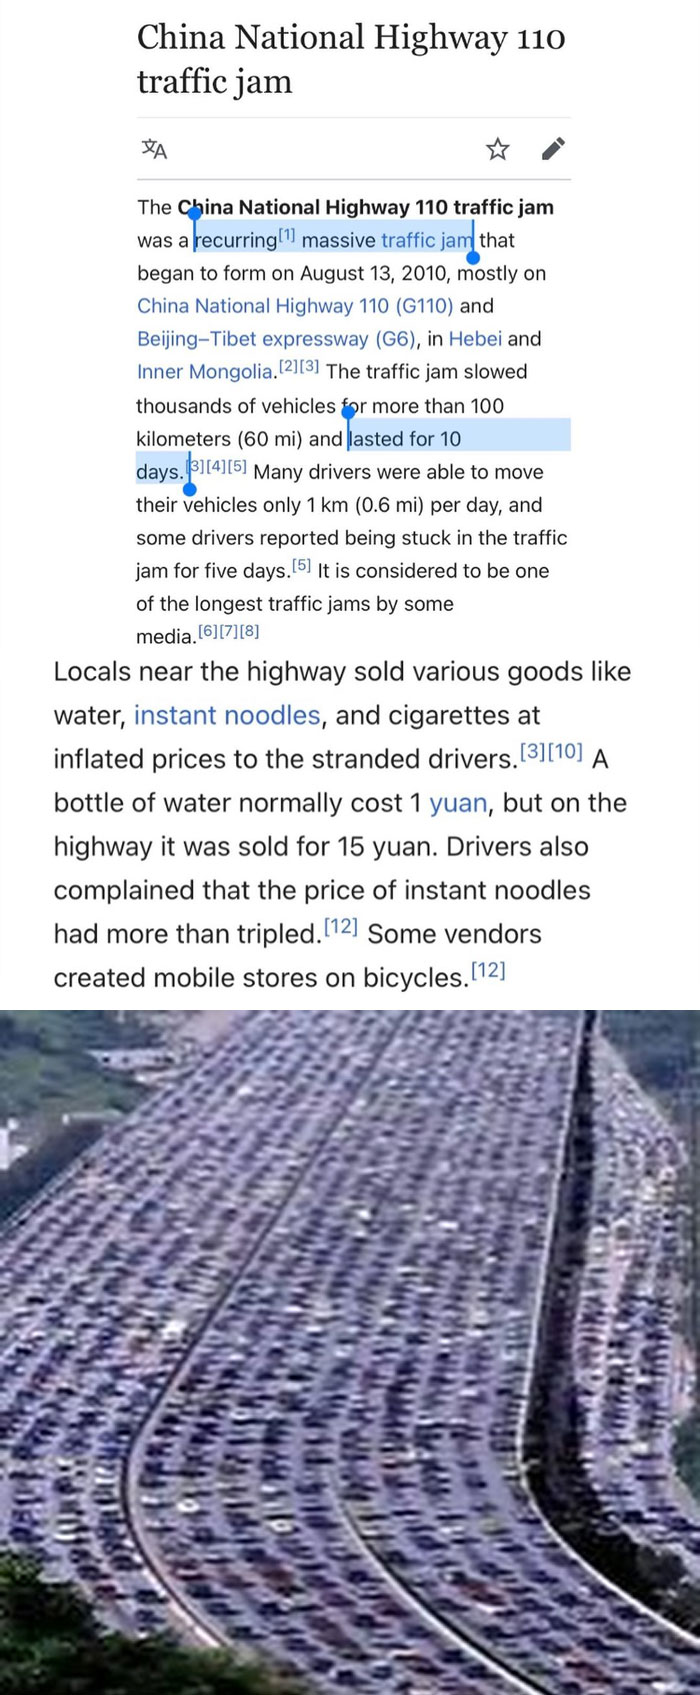 The Week-Long Traffic Jam In China Which LED To Locals Charging Stranded Drivers Astronomical Prices For Water And Food